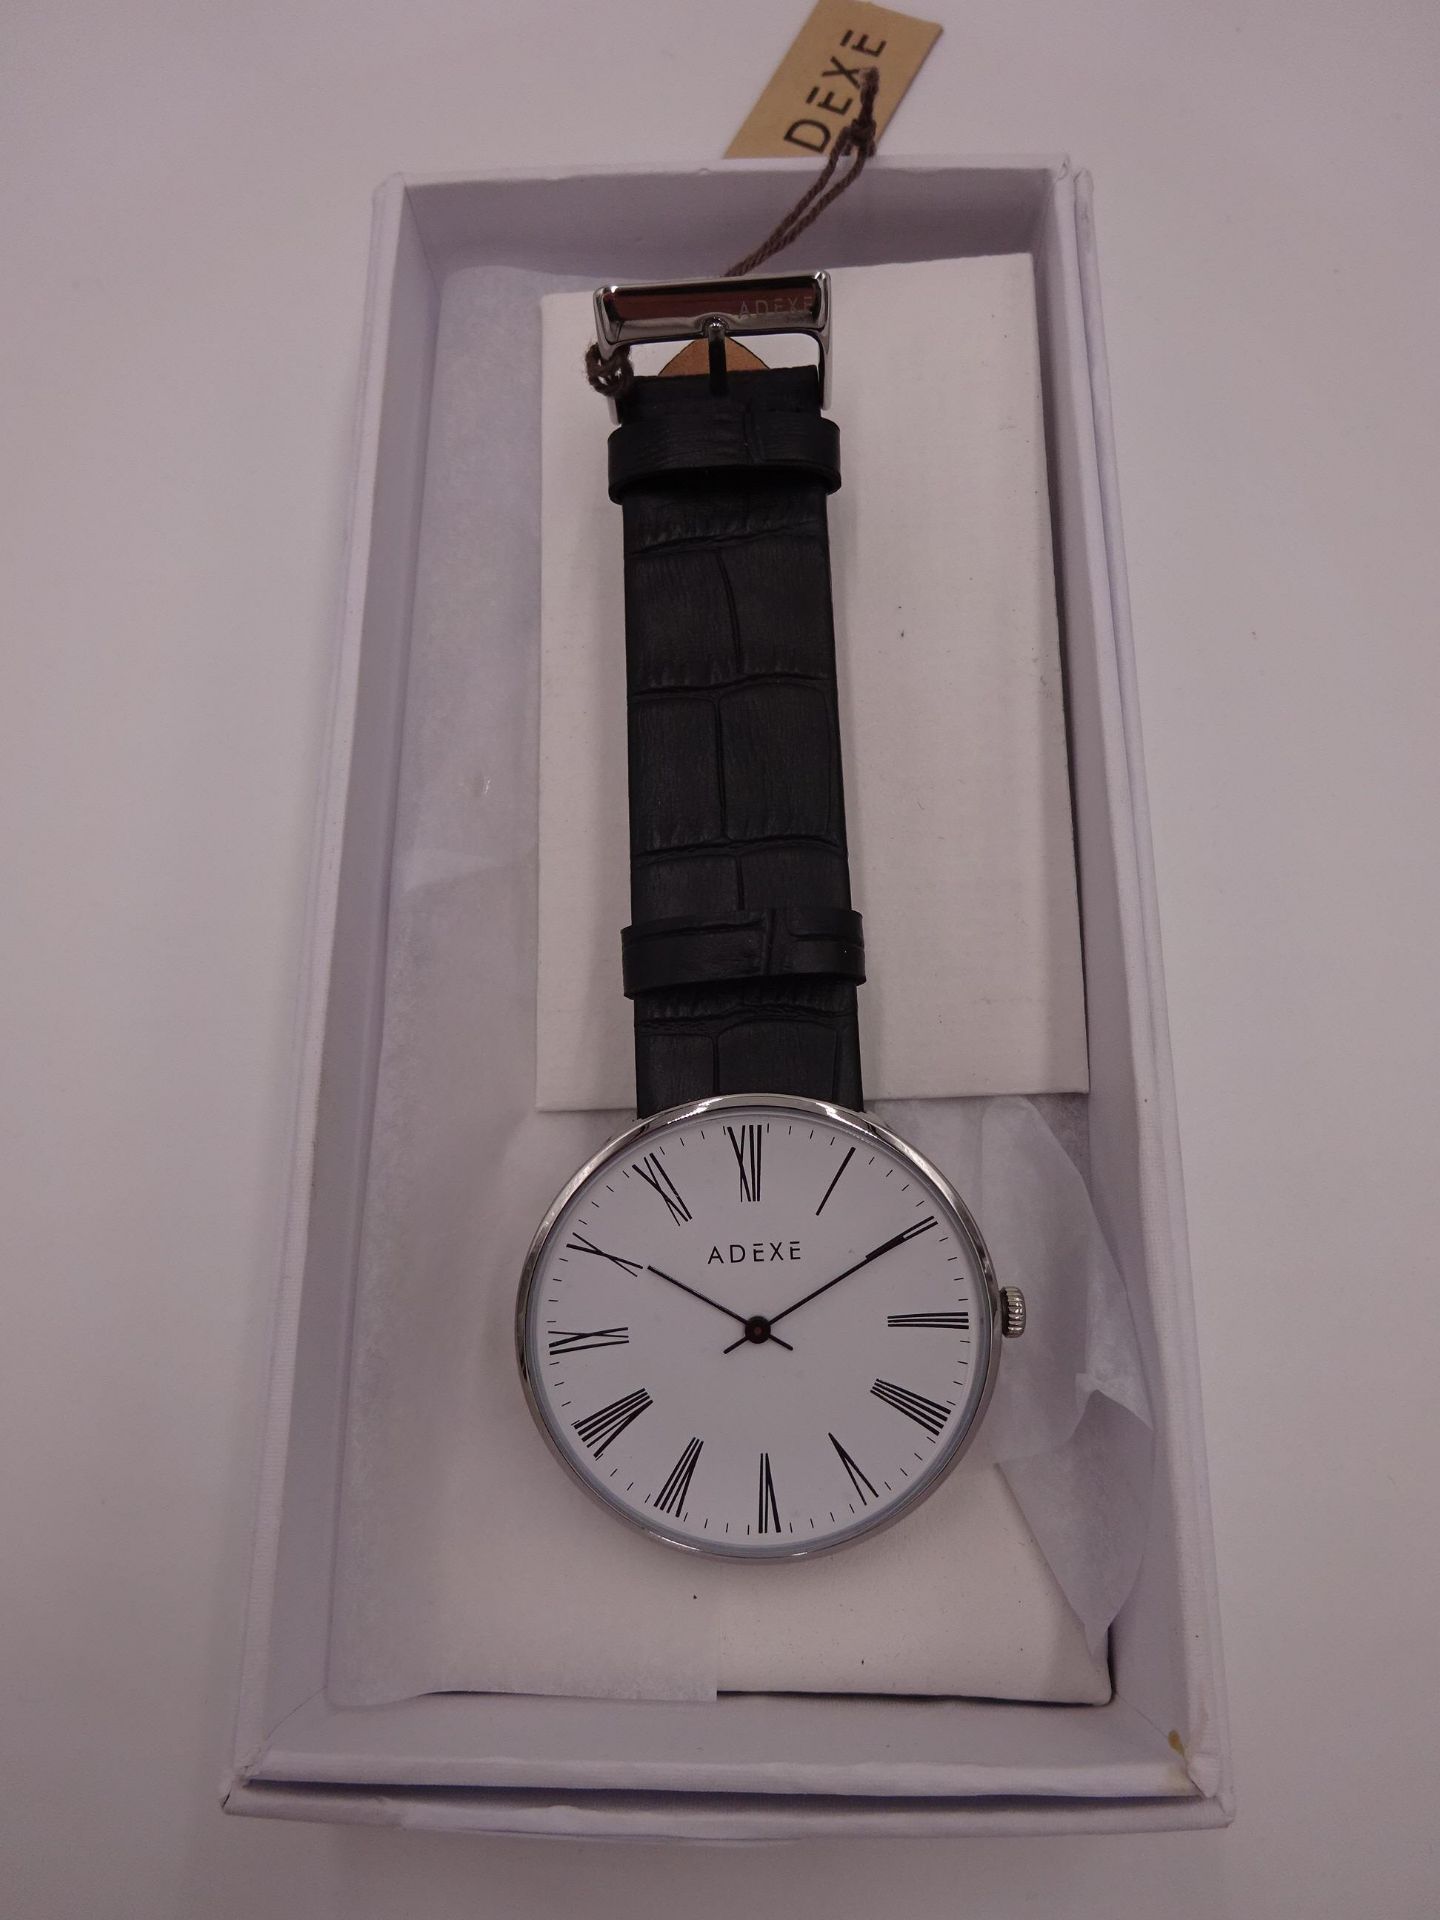 New large faced dress watch Leather strap